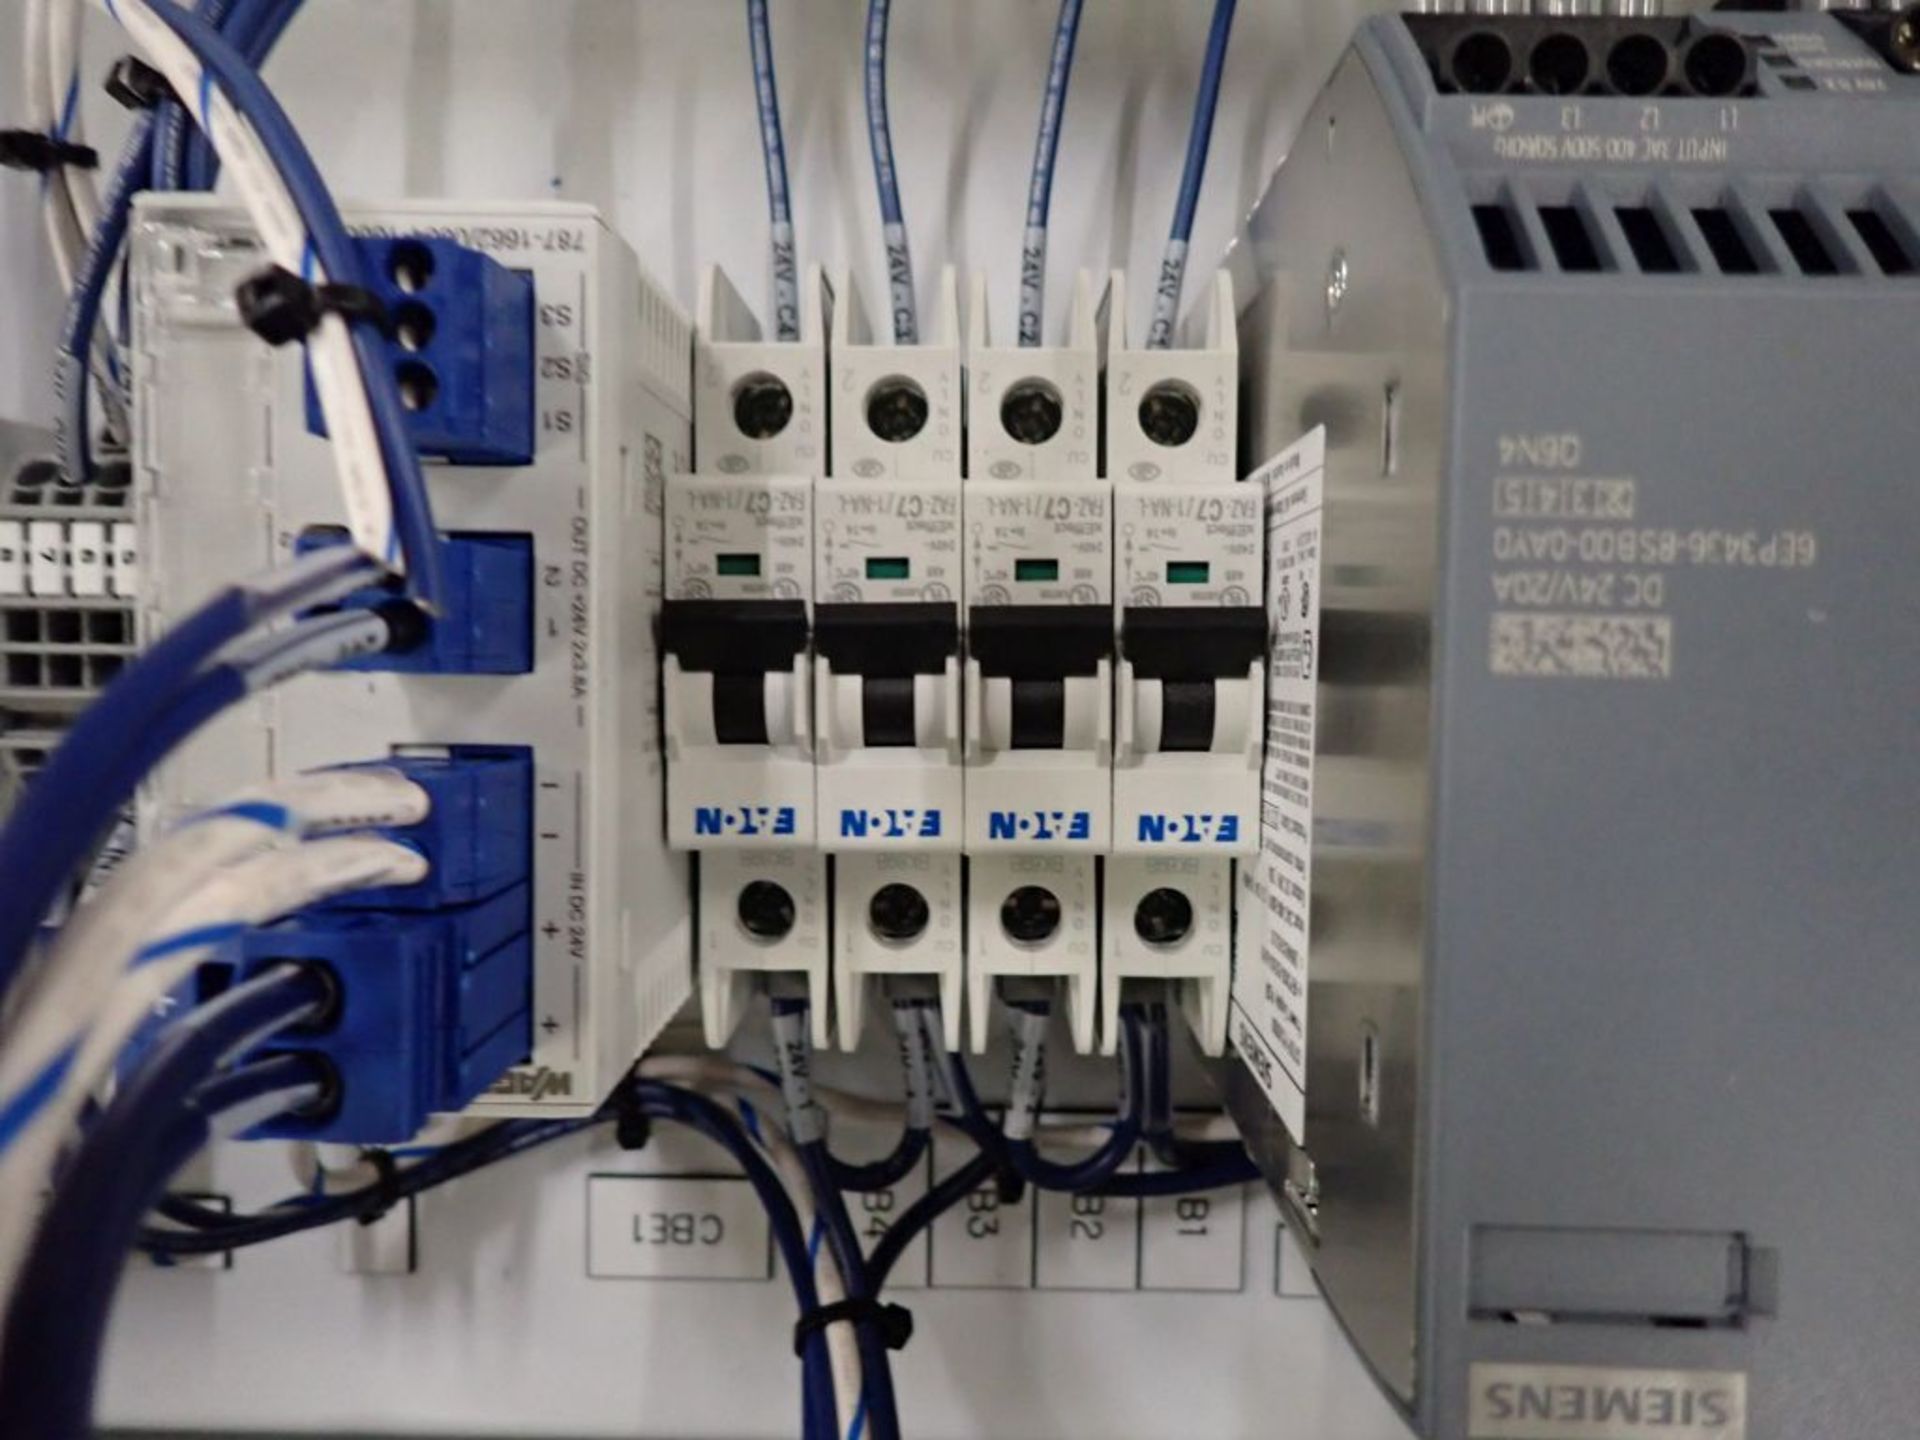 Hoffman Nvent Industrial Control Panel Enclosure with Contents - Image 7 of 7